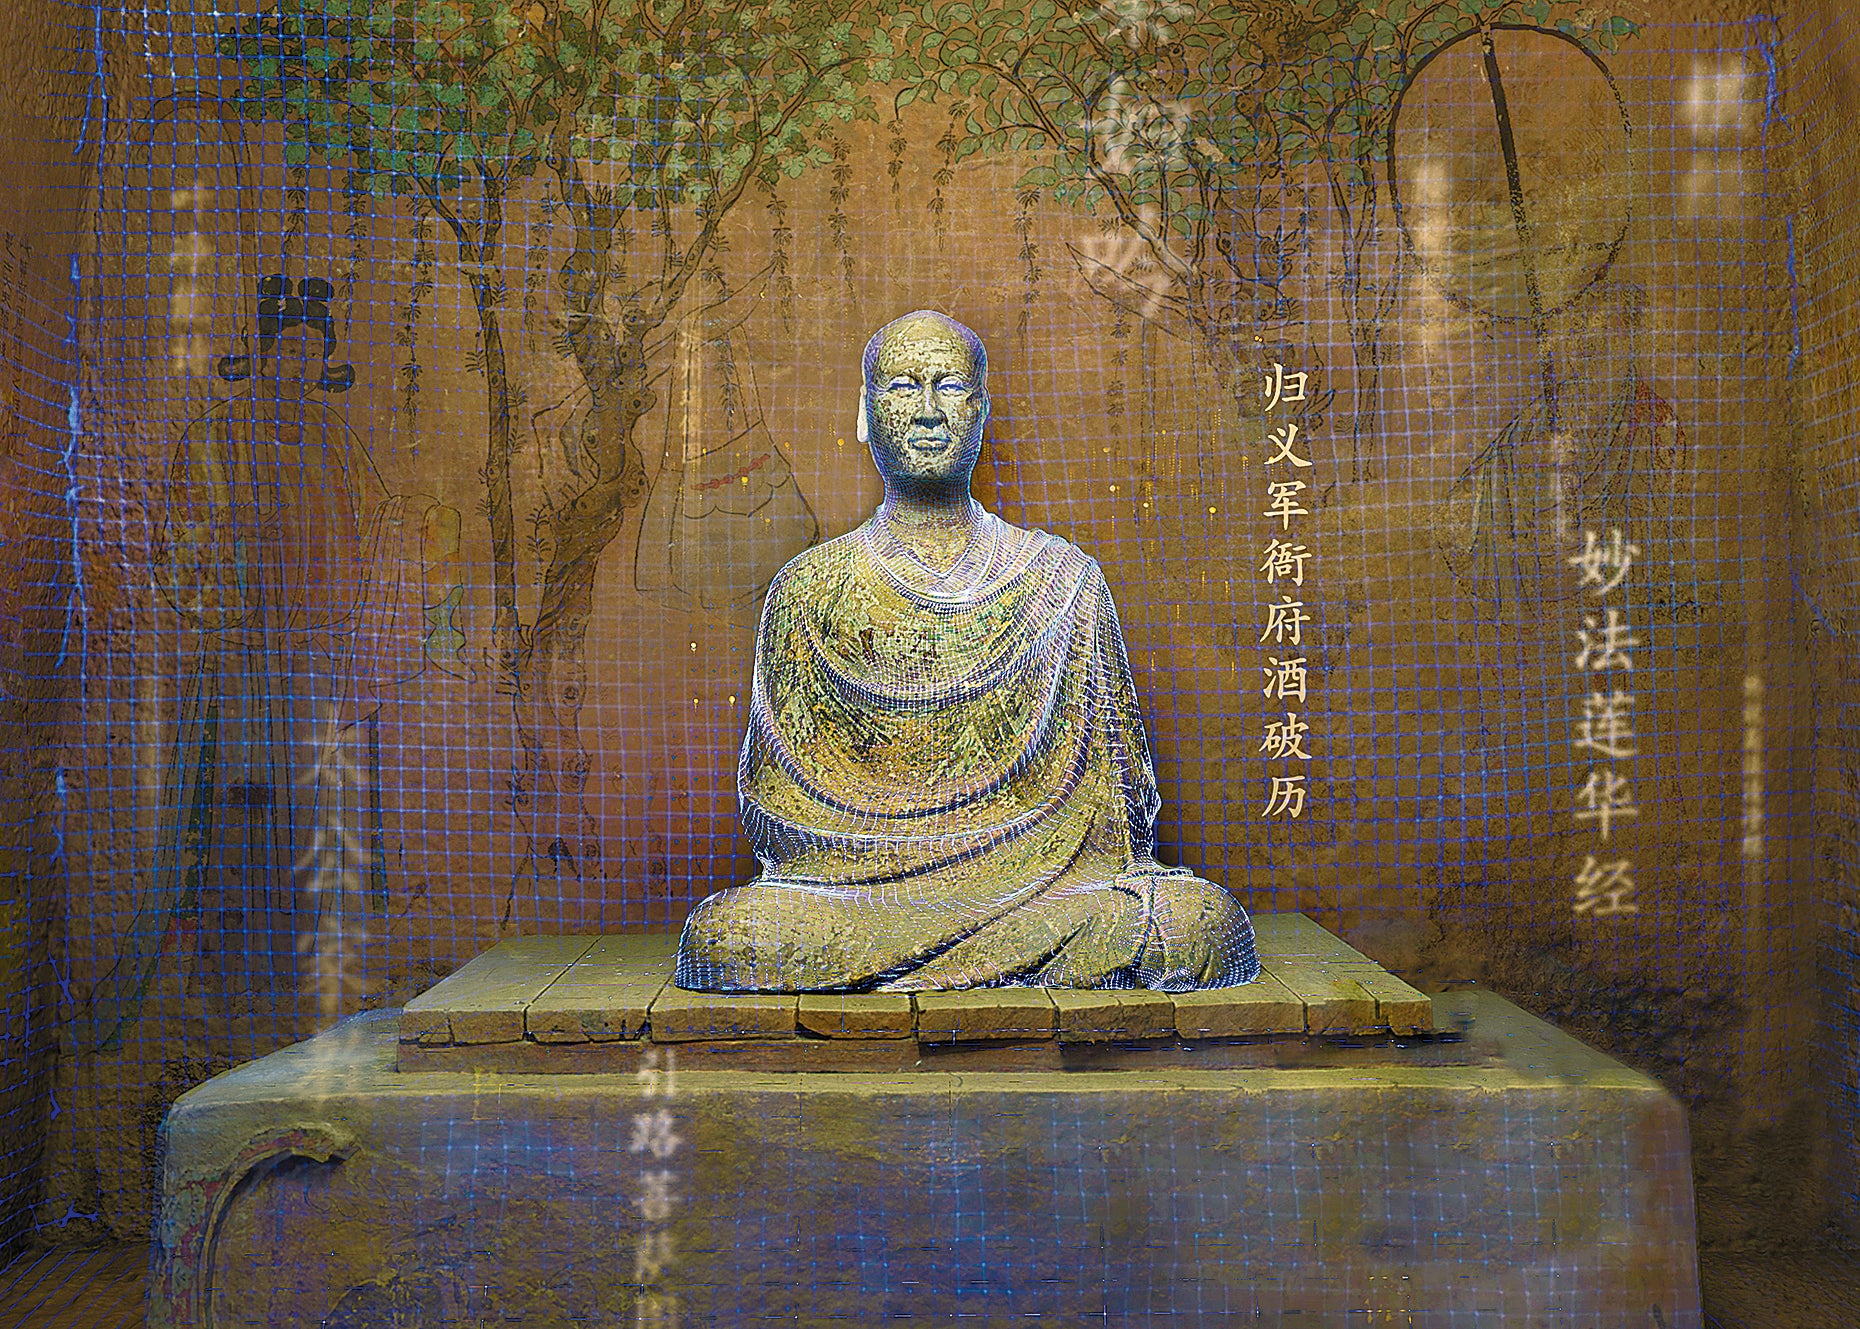 A statue of the cave’s reputed owner, the Monk Hongbian, is reproduced in the project